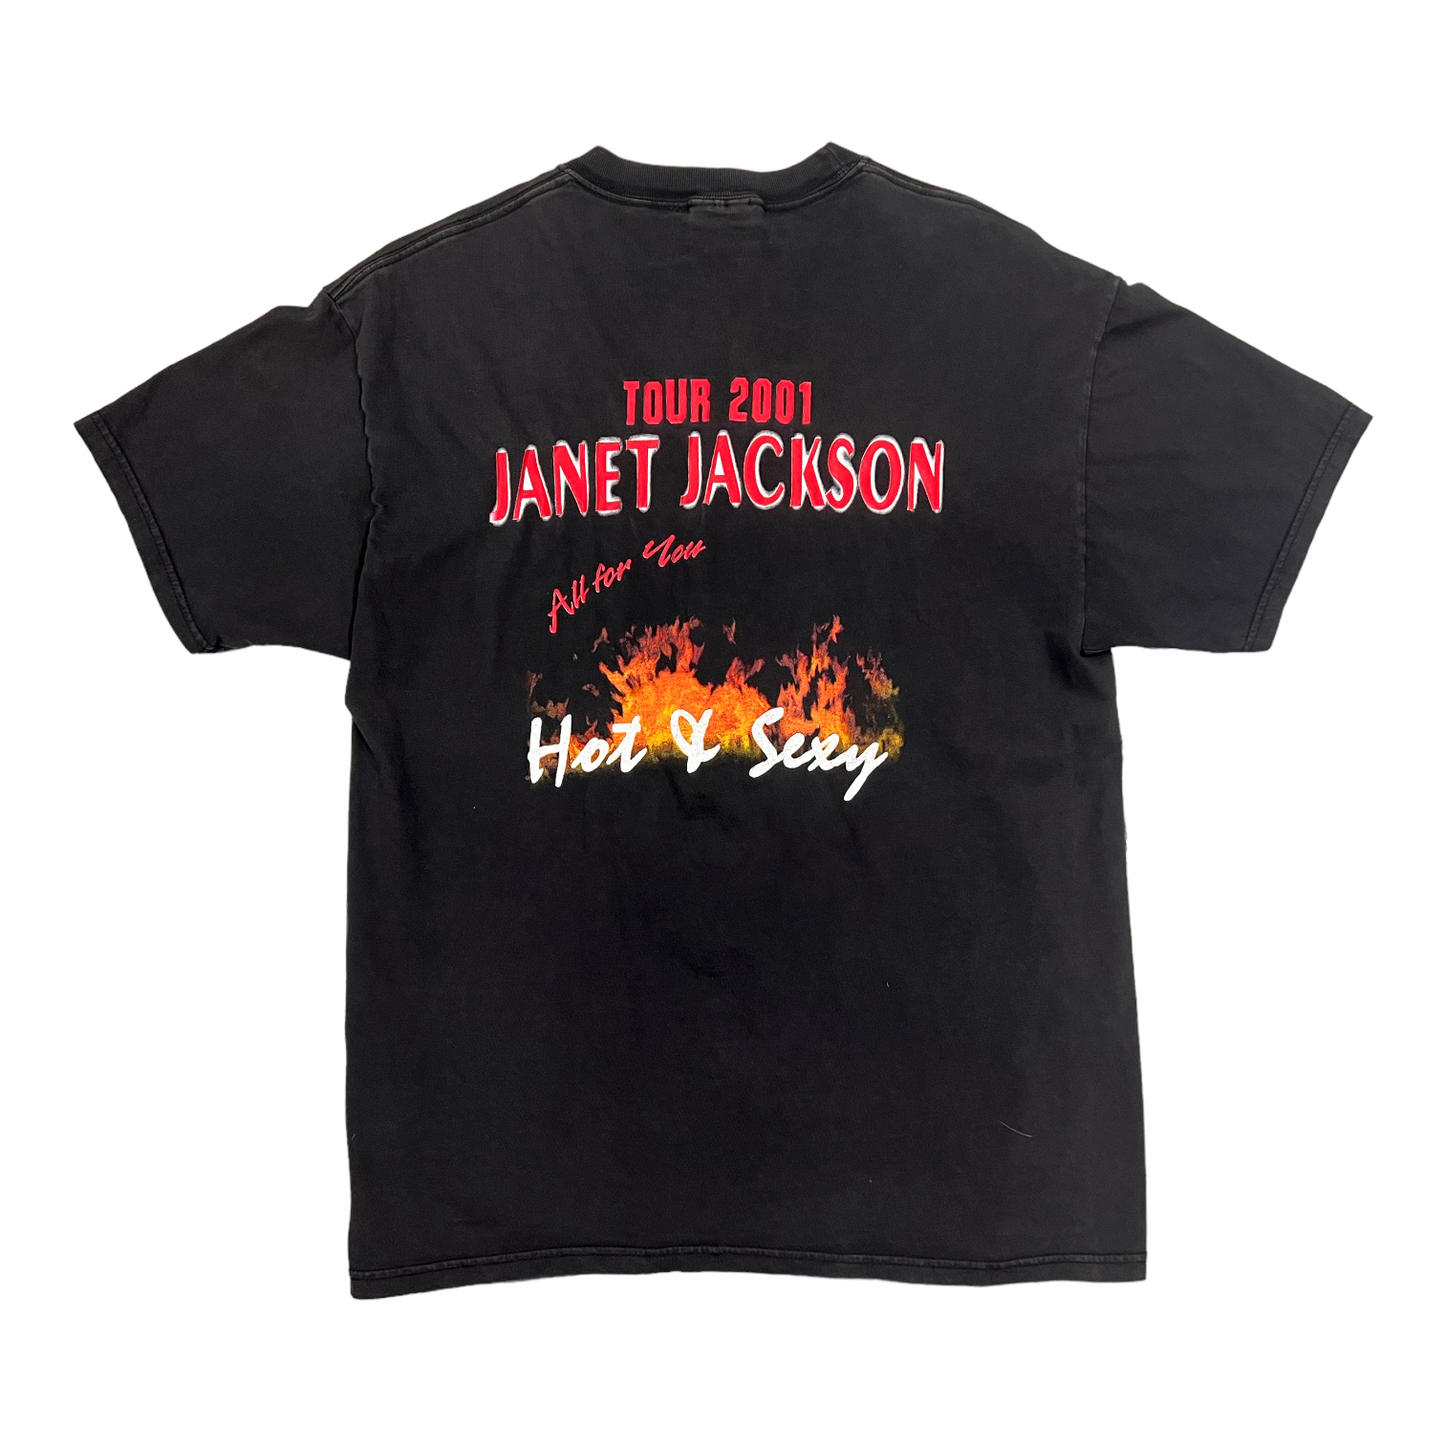 2001 JANET JACKSON  “All for you” vintage Rap tee